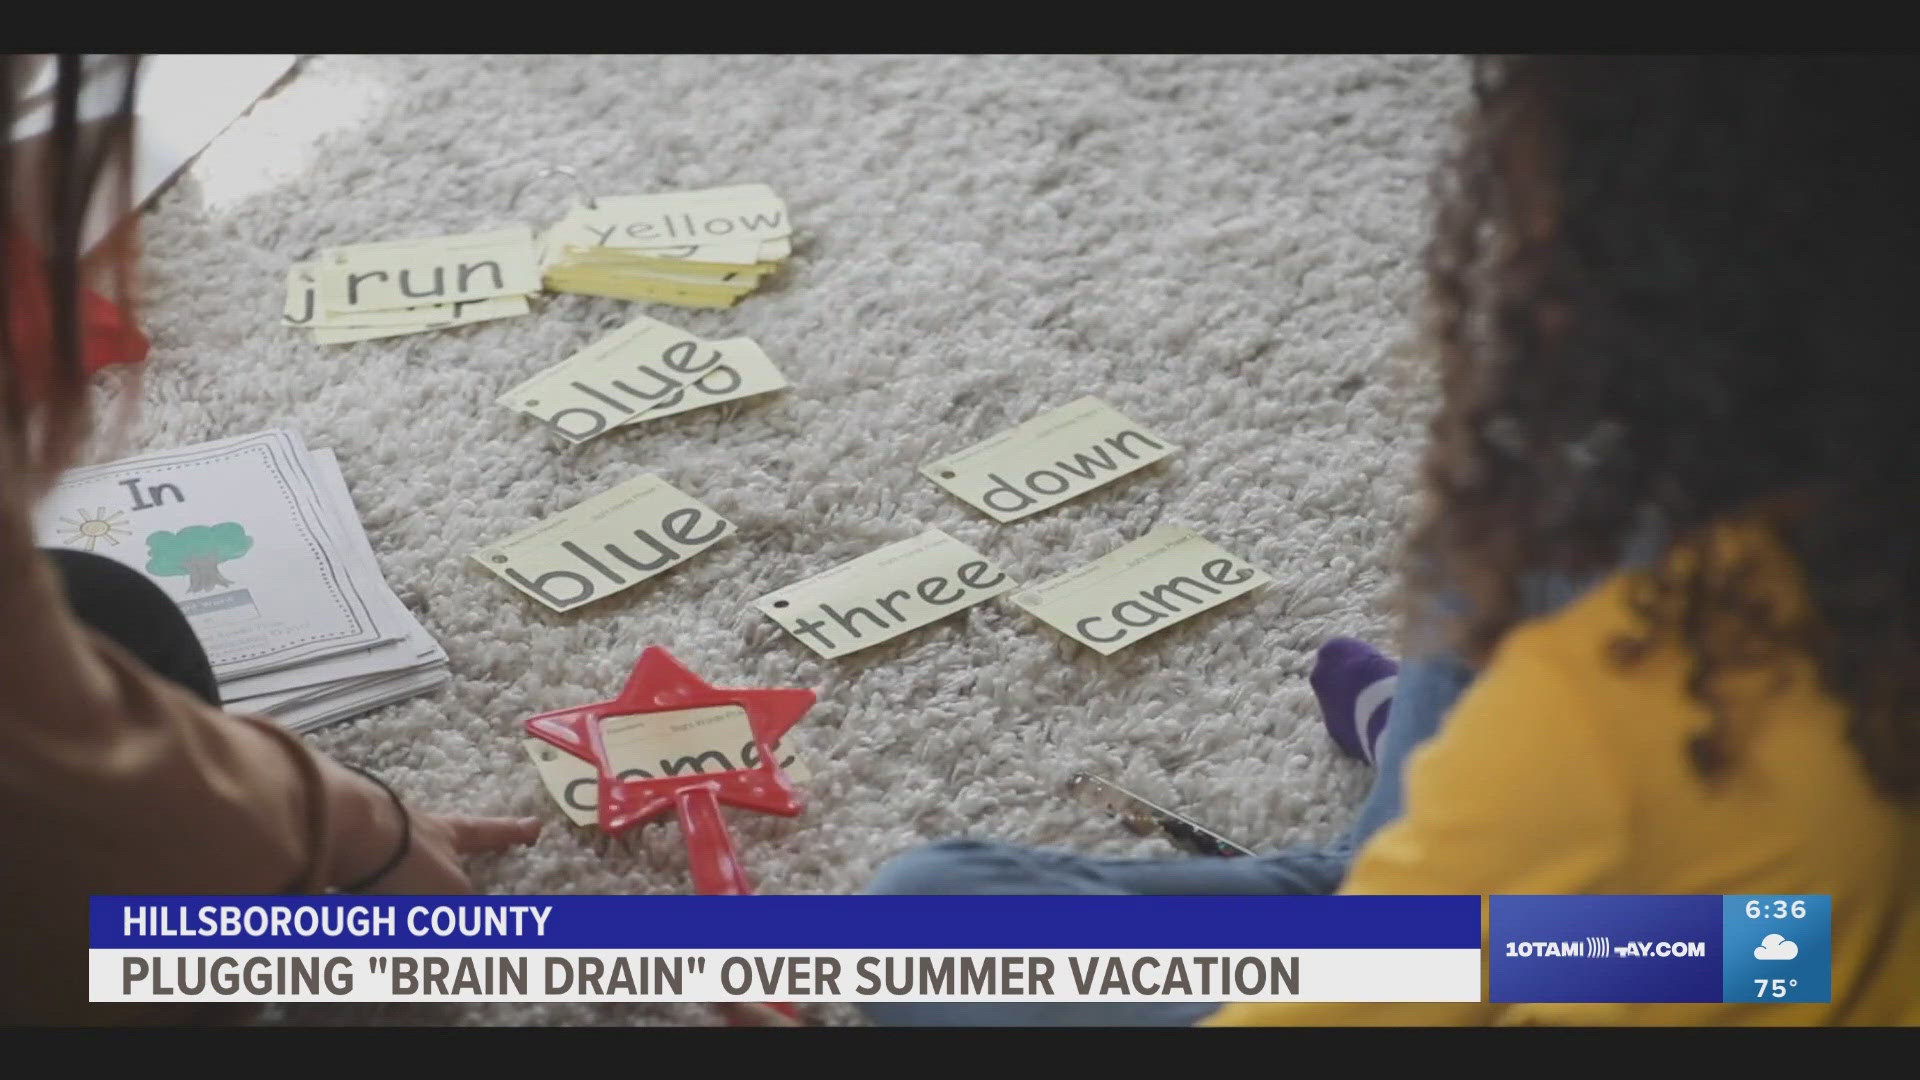 Experts are providing tips on how students can avoid "Brain Drain" over summer vacation and do well when they return to school in the fall.